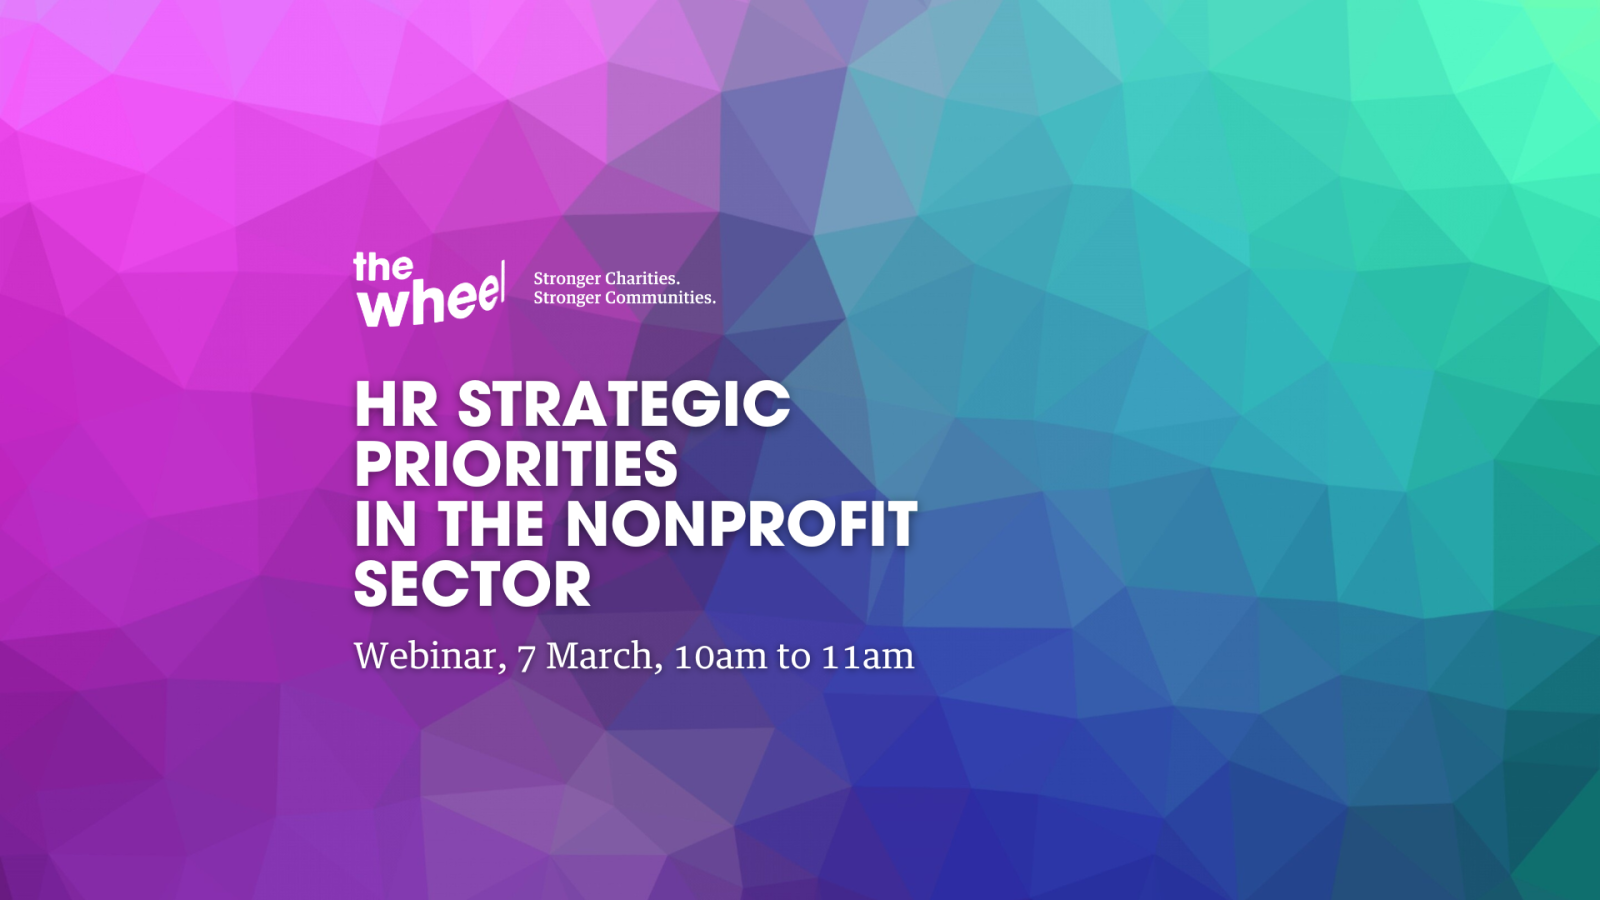 HR Strategic Priorities in the Nonprofit Sector (7 March 2023)